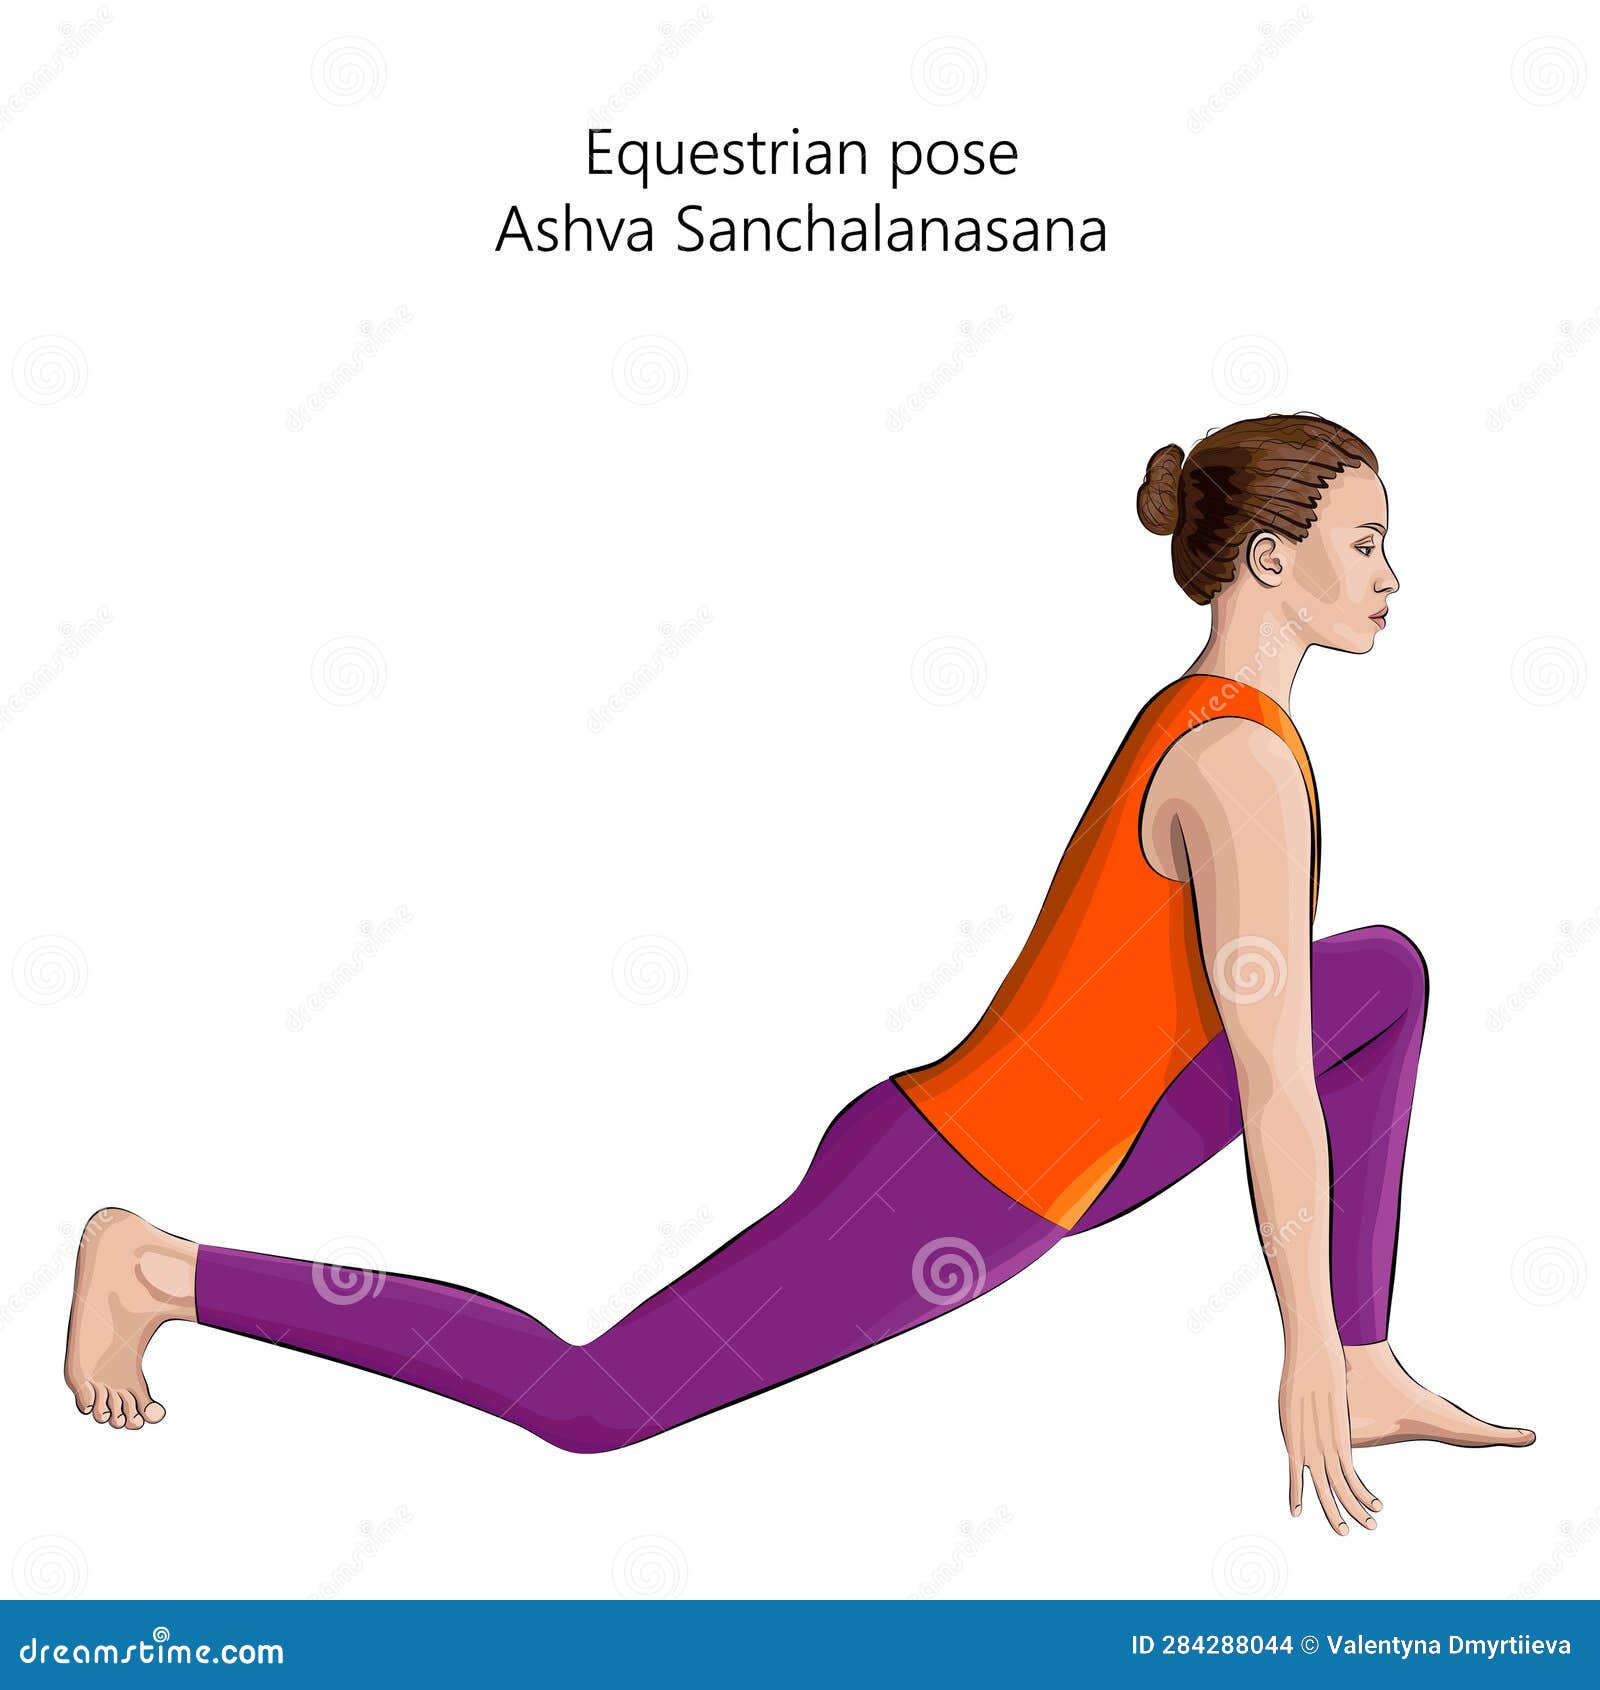 Sketch Of Young Woman Practicing Yoga Doing Equestrian Pose Ashva  Sanchalanasana Arm Leg Support And Balancing Beginner Isolated Vector  Illustration Stock Illustration - Download Image Now - iStock